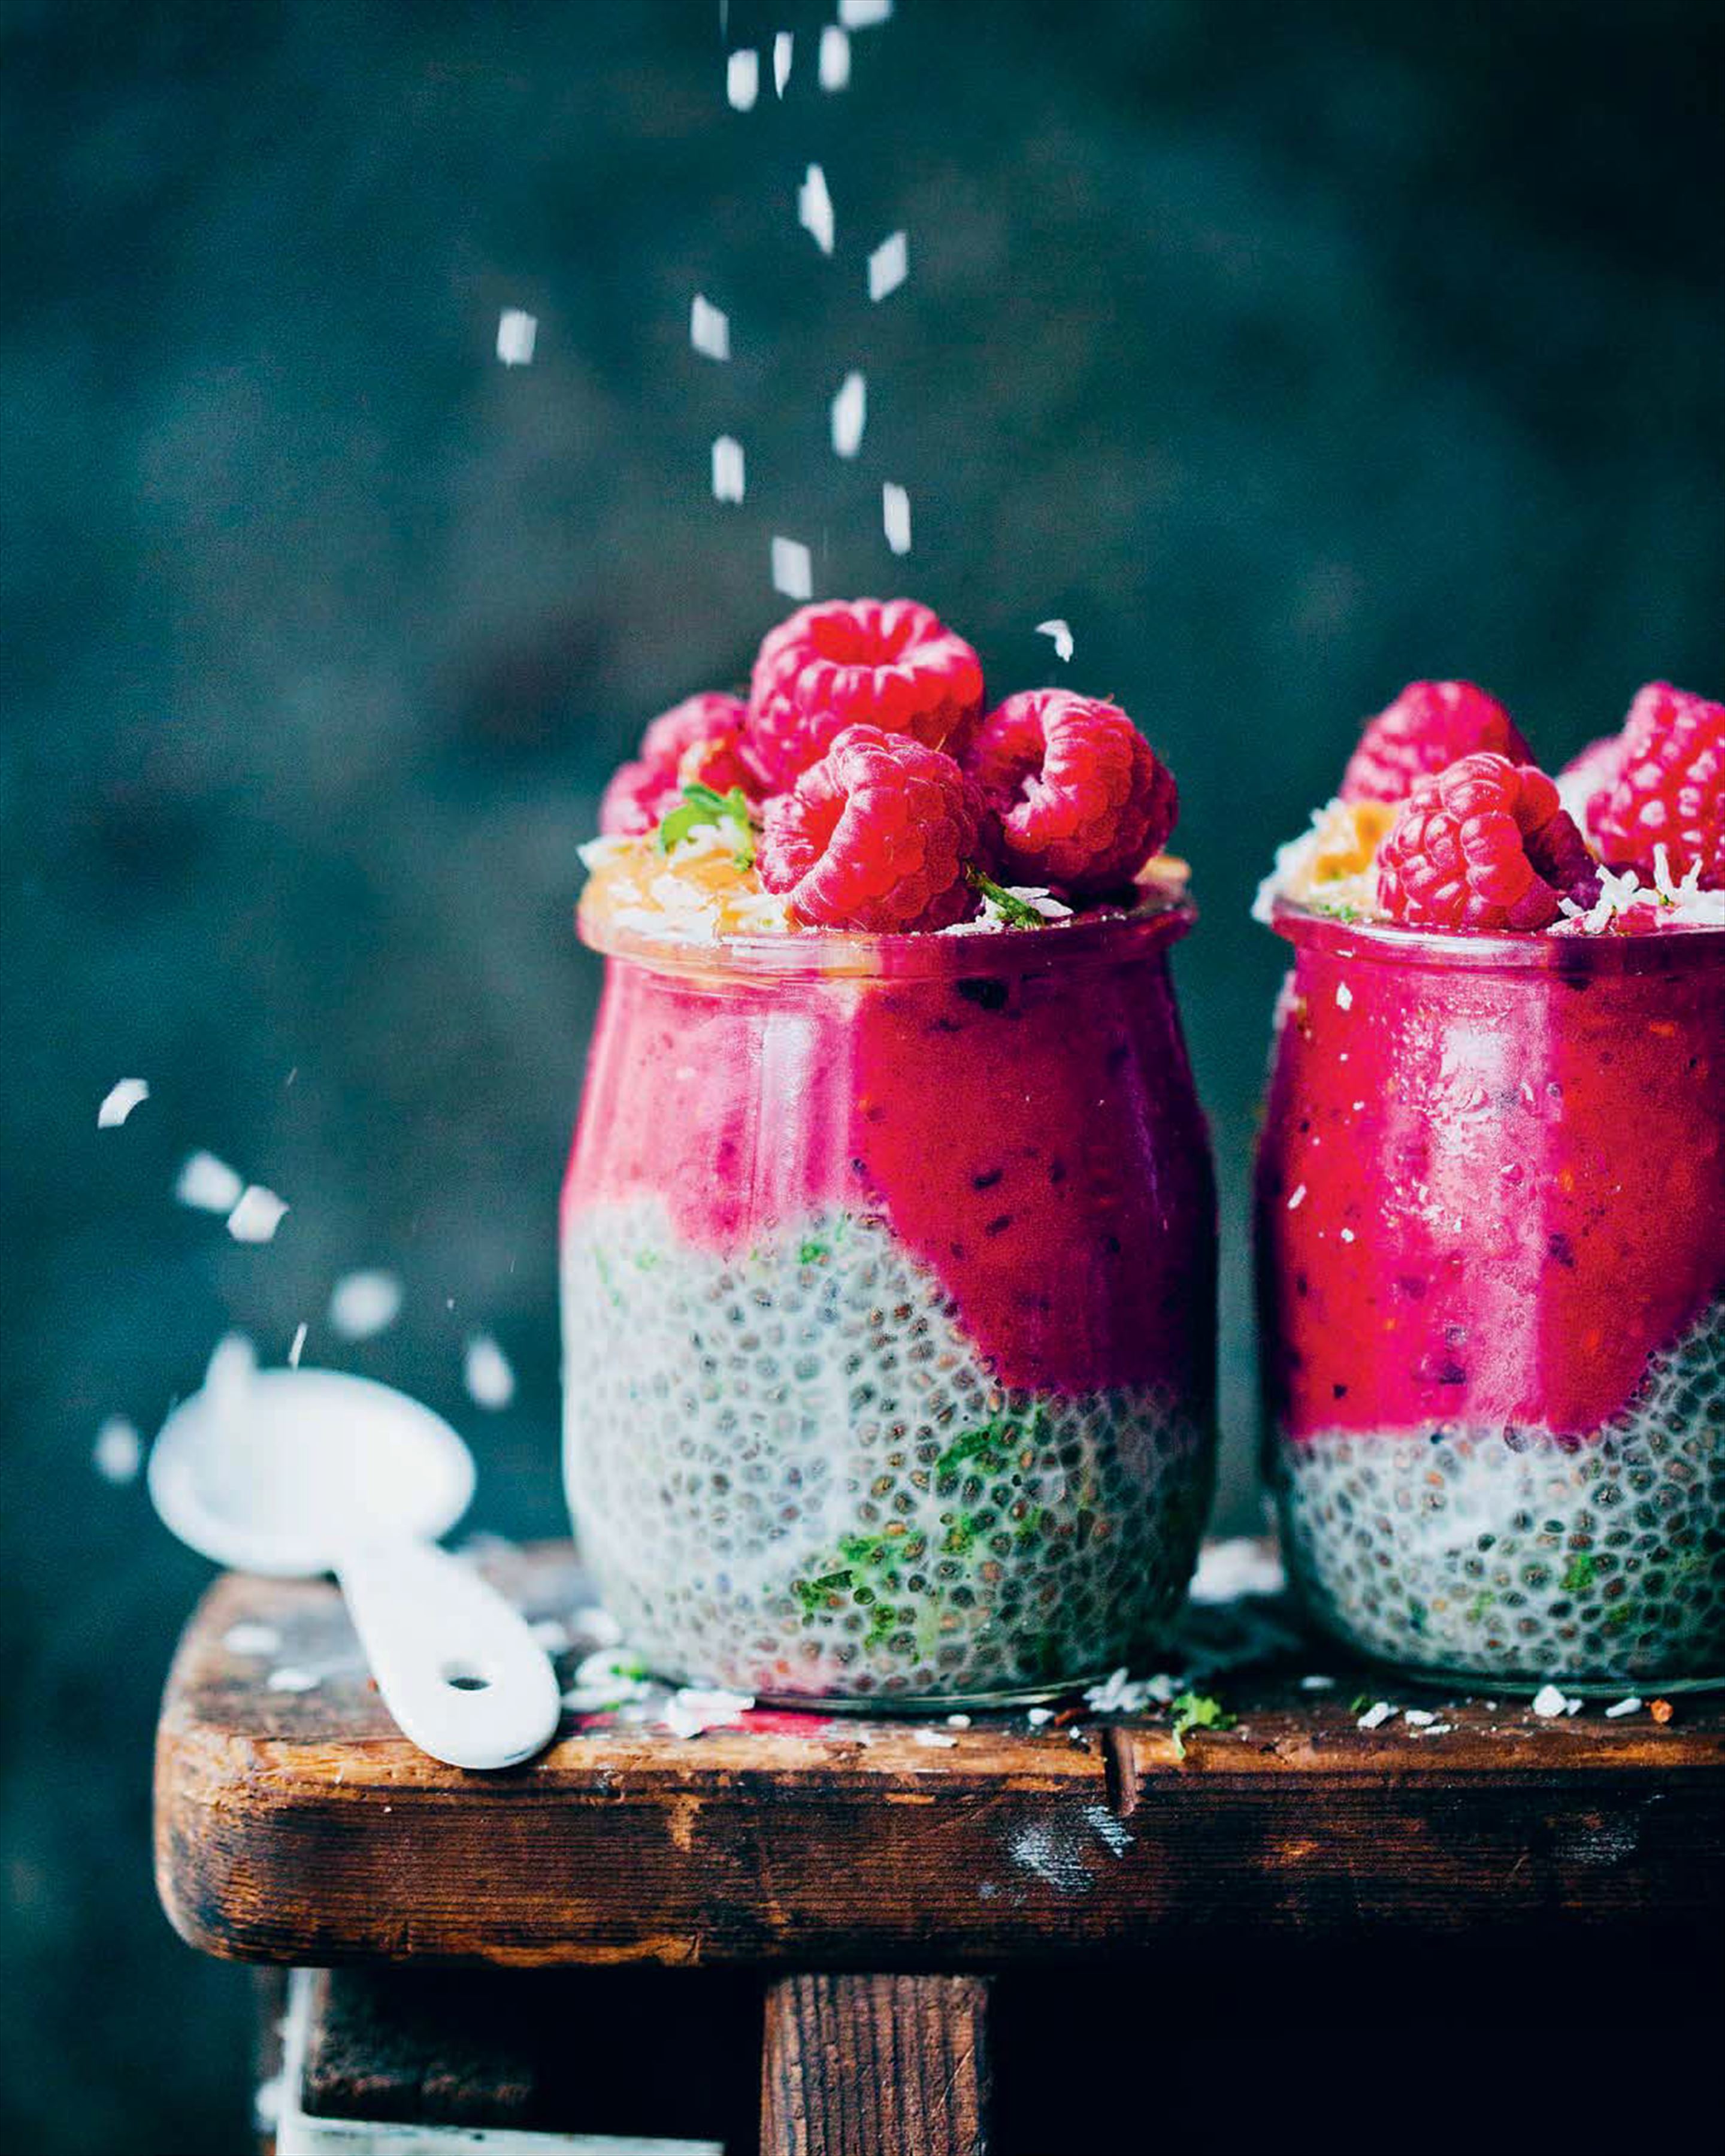 Raspberry mousse and chia parfait